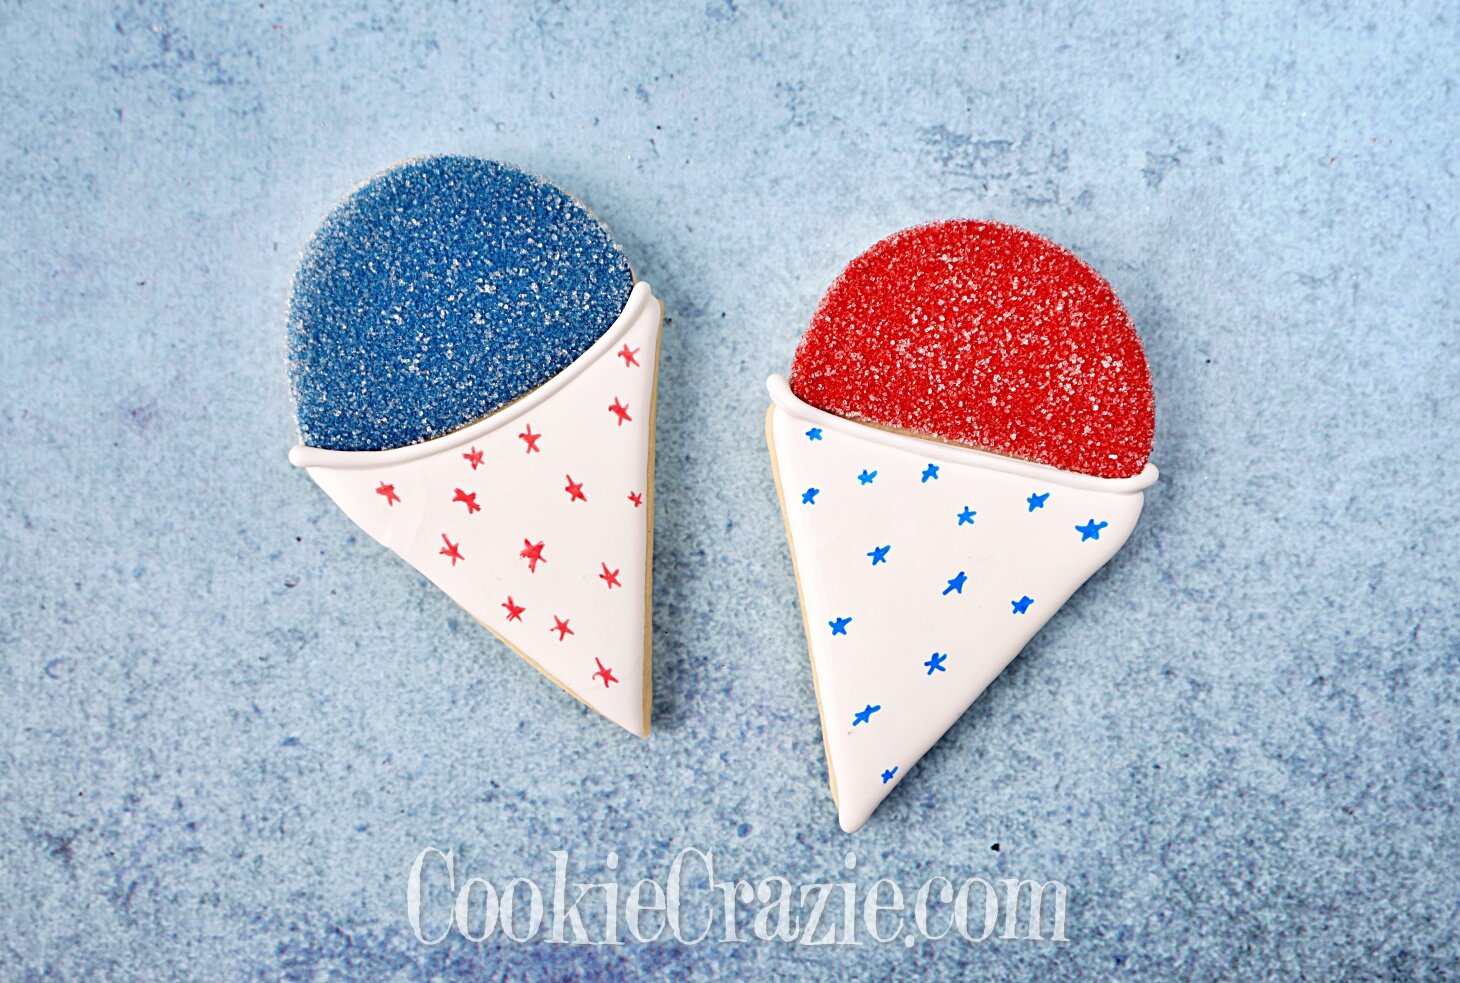  All American Snow Cone Decorated Sugar Cookie YouTube video  HERE  